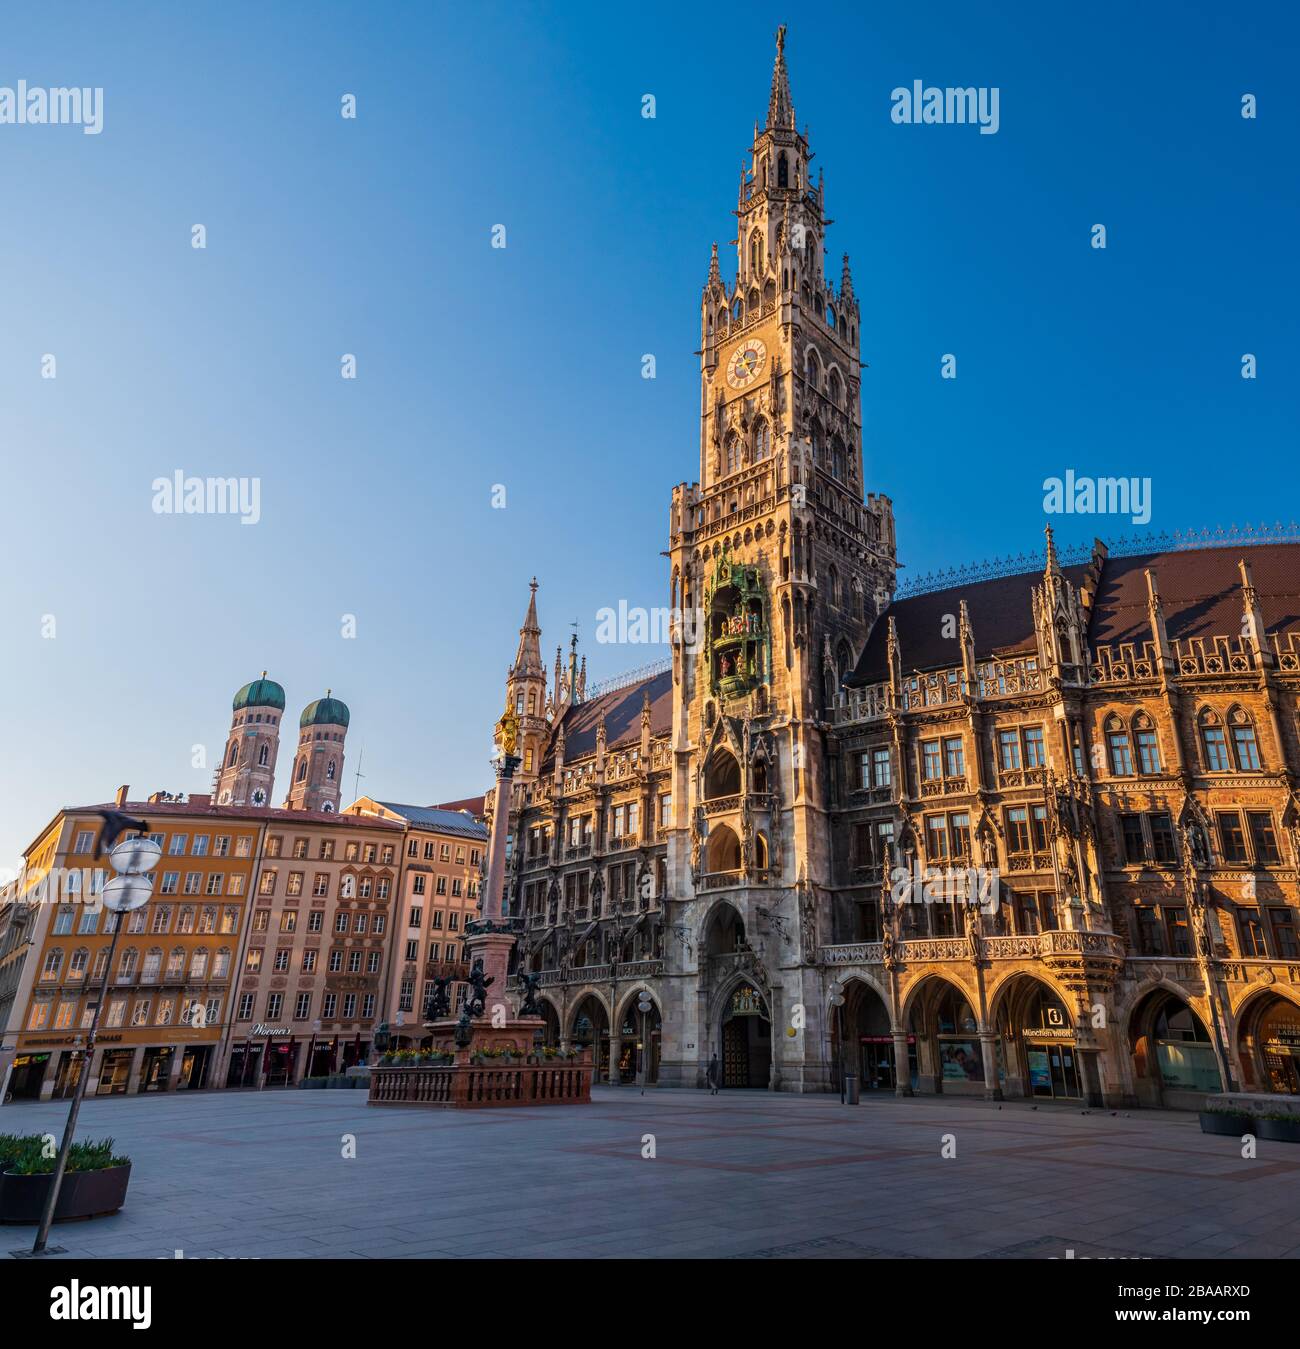 Munich-Germany, March 25 2020: Almost no people on the usually crowded Marienplatz square in Munich due to the Corona crisis Stock Photo